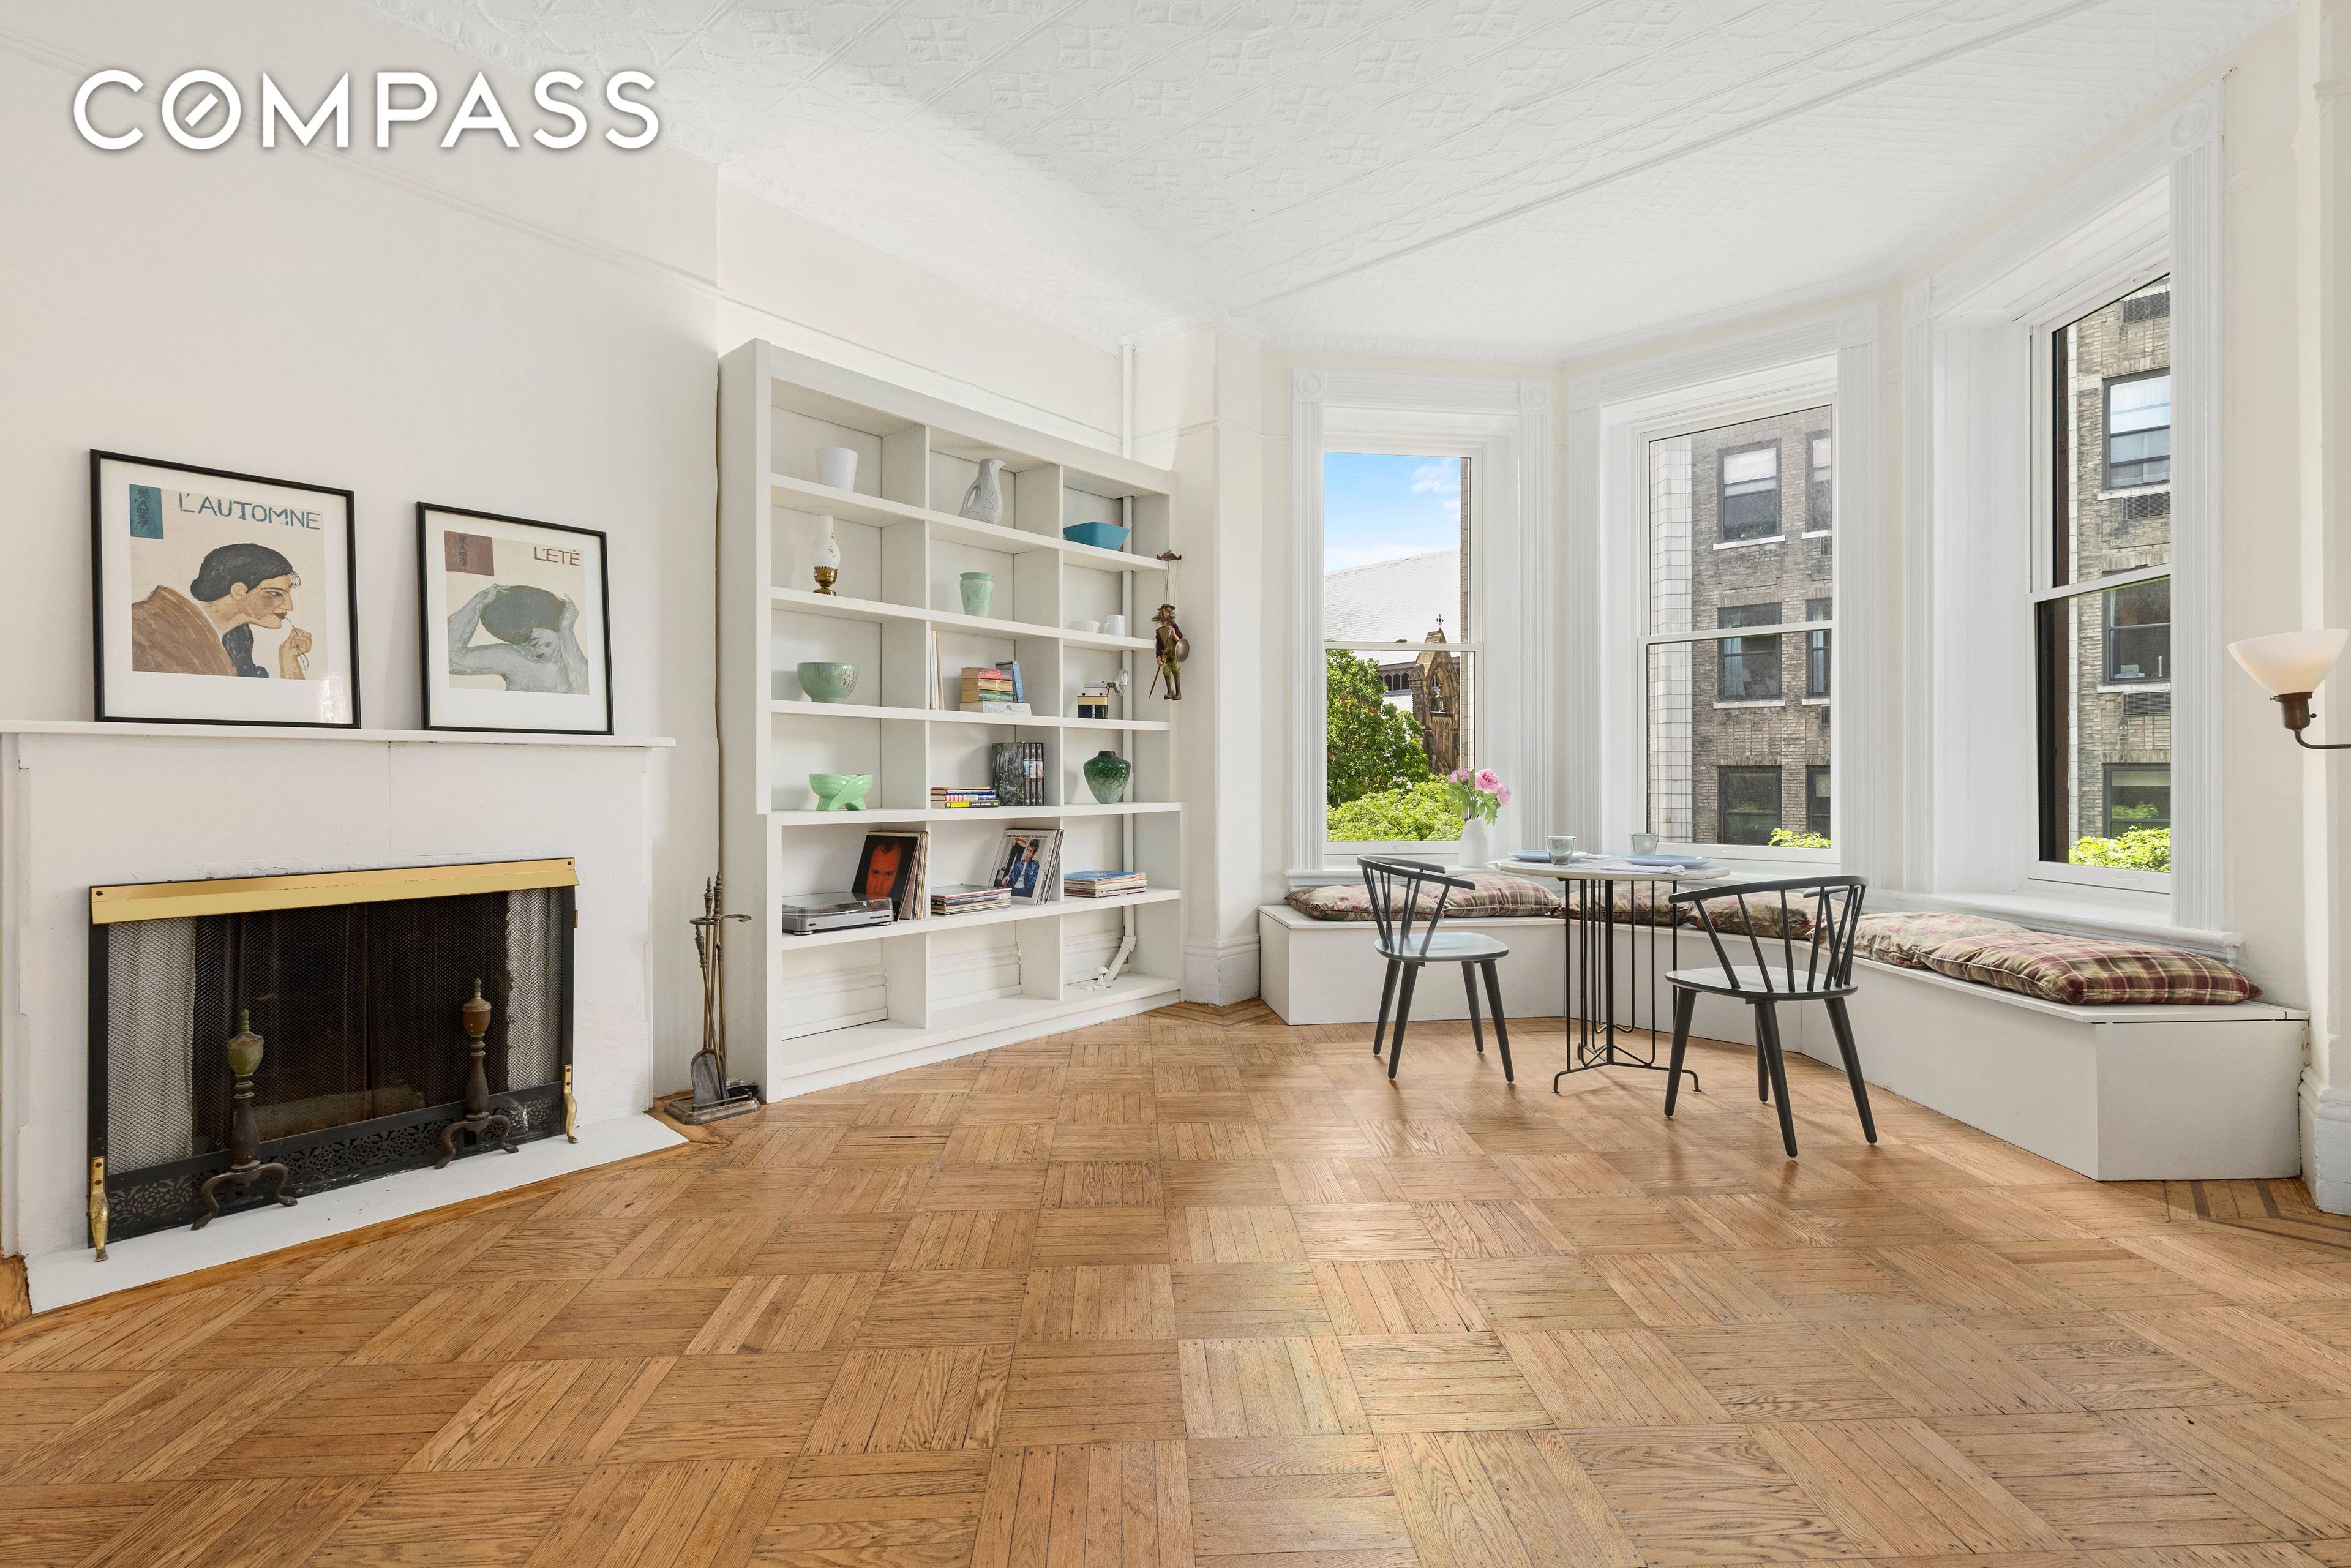 Apt 4F at 153 Joralemon St is a bright and cozy 1 bed 1 bath co op in prime Brooklyn Heights.